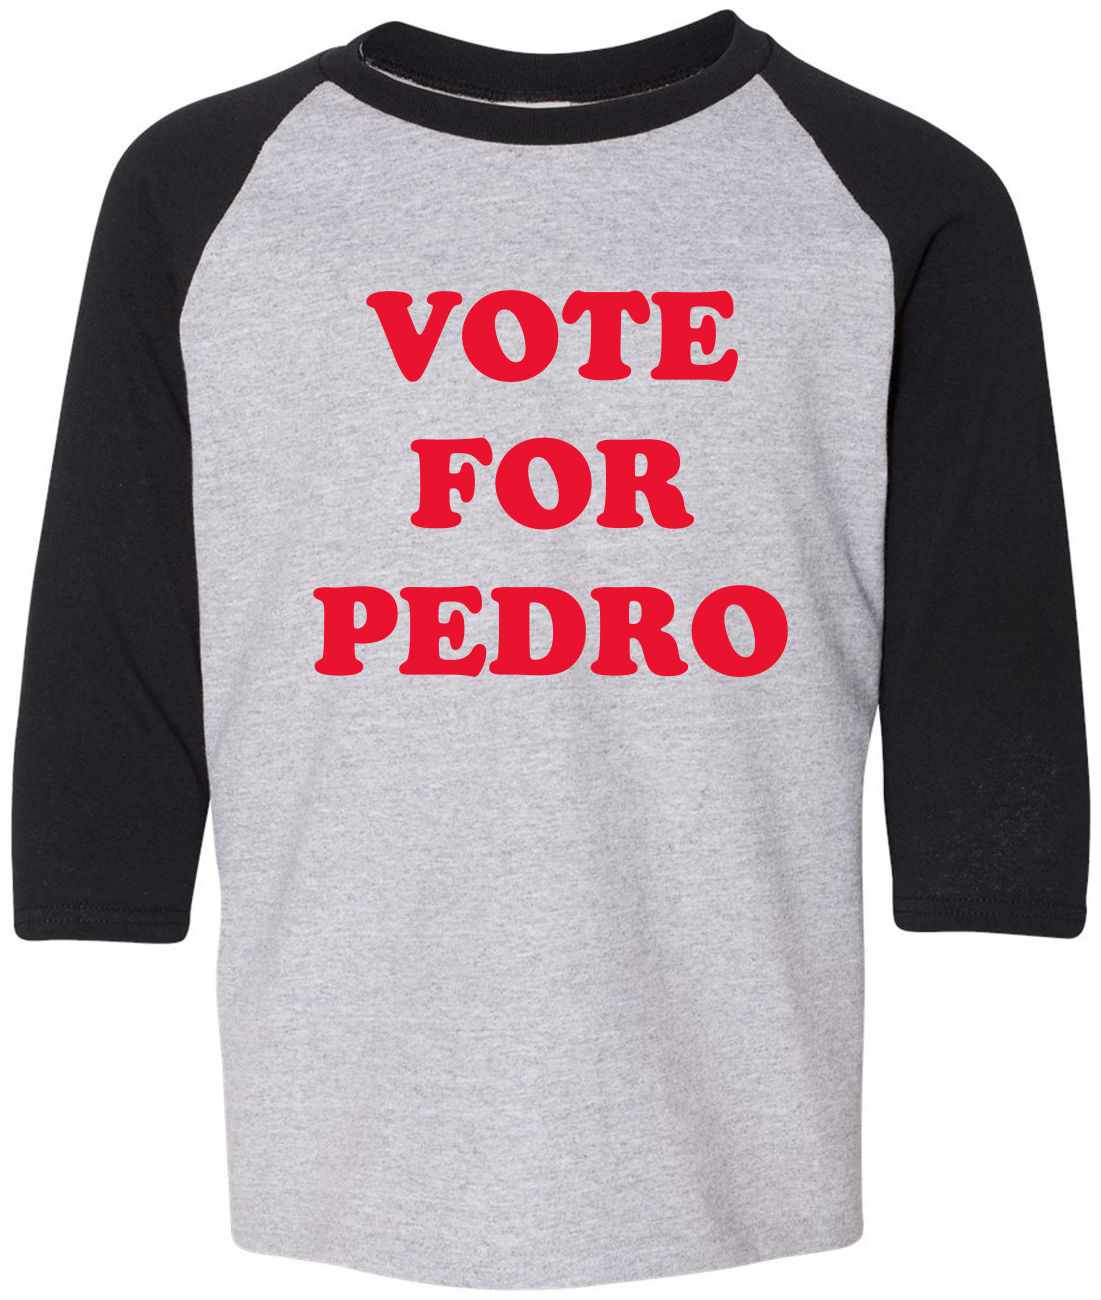 Vote for Pedro on Youth Baseball Shirt